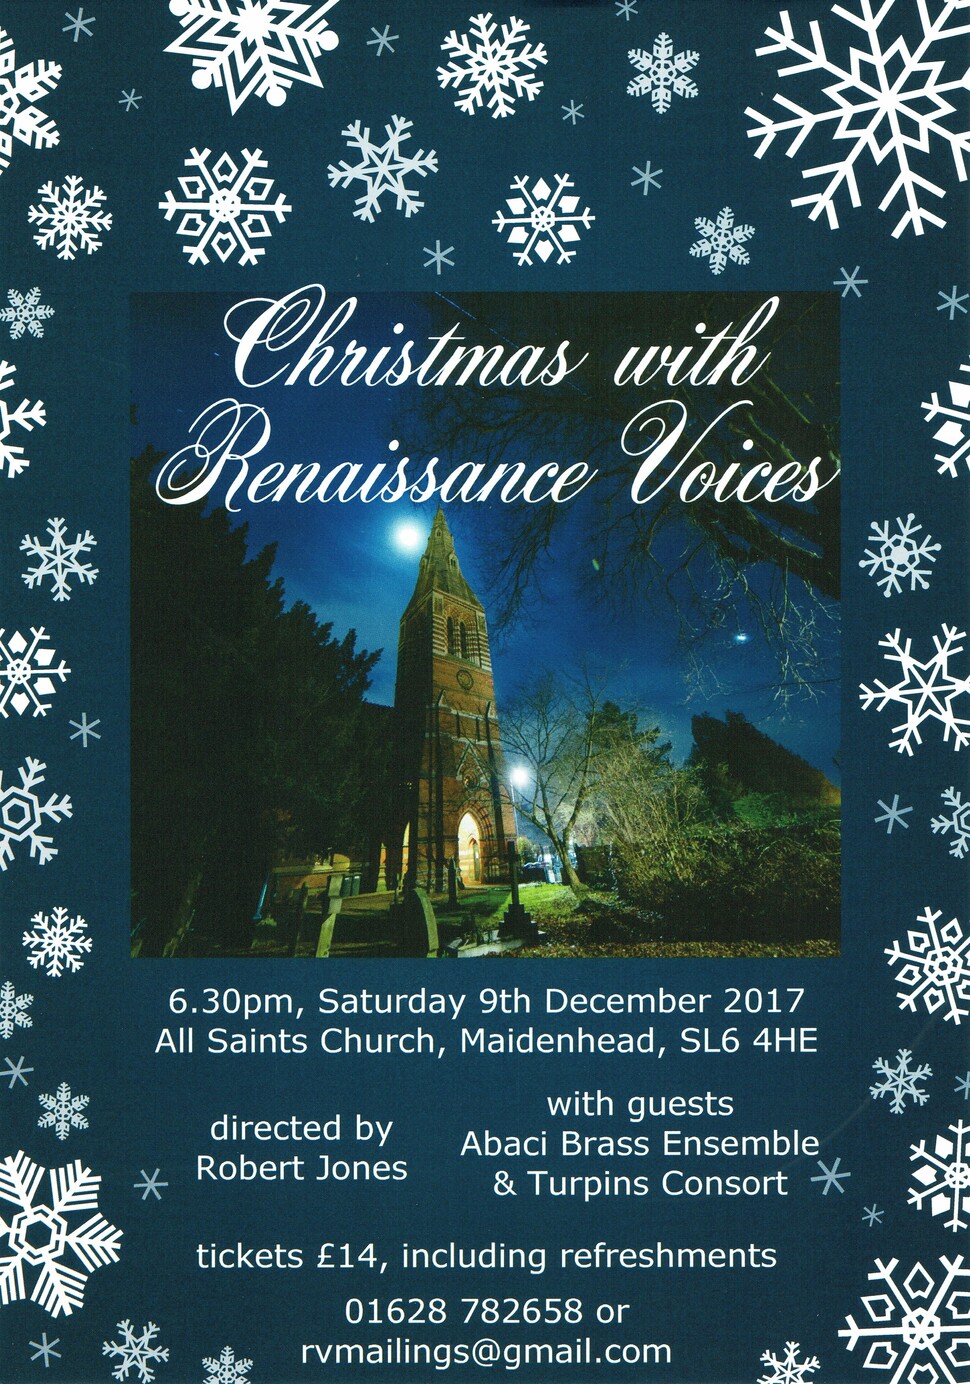 Flyer for the concert on Saturday, 9th December 2017